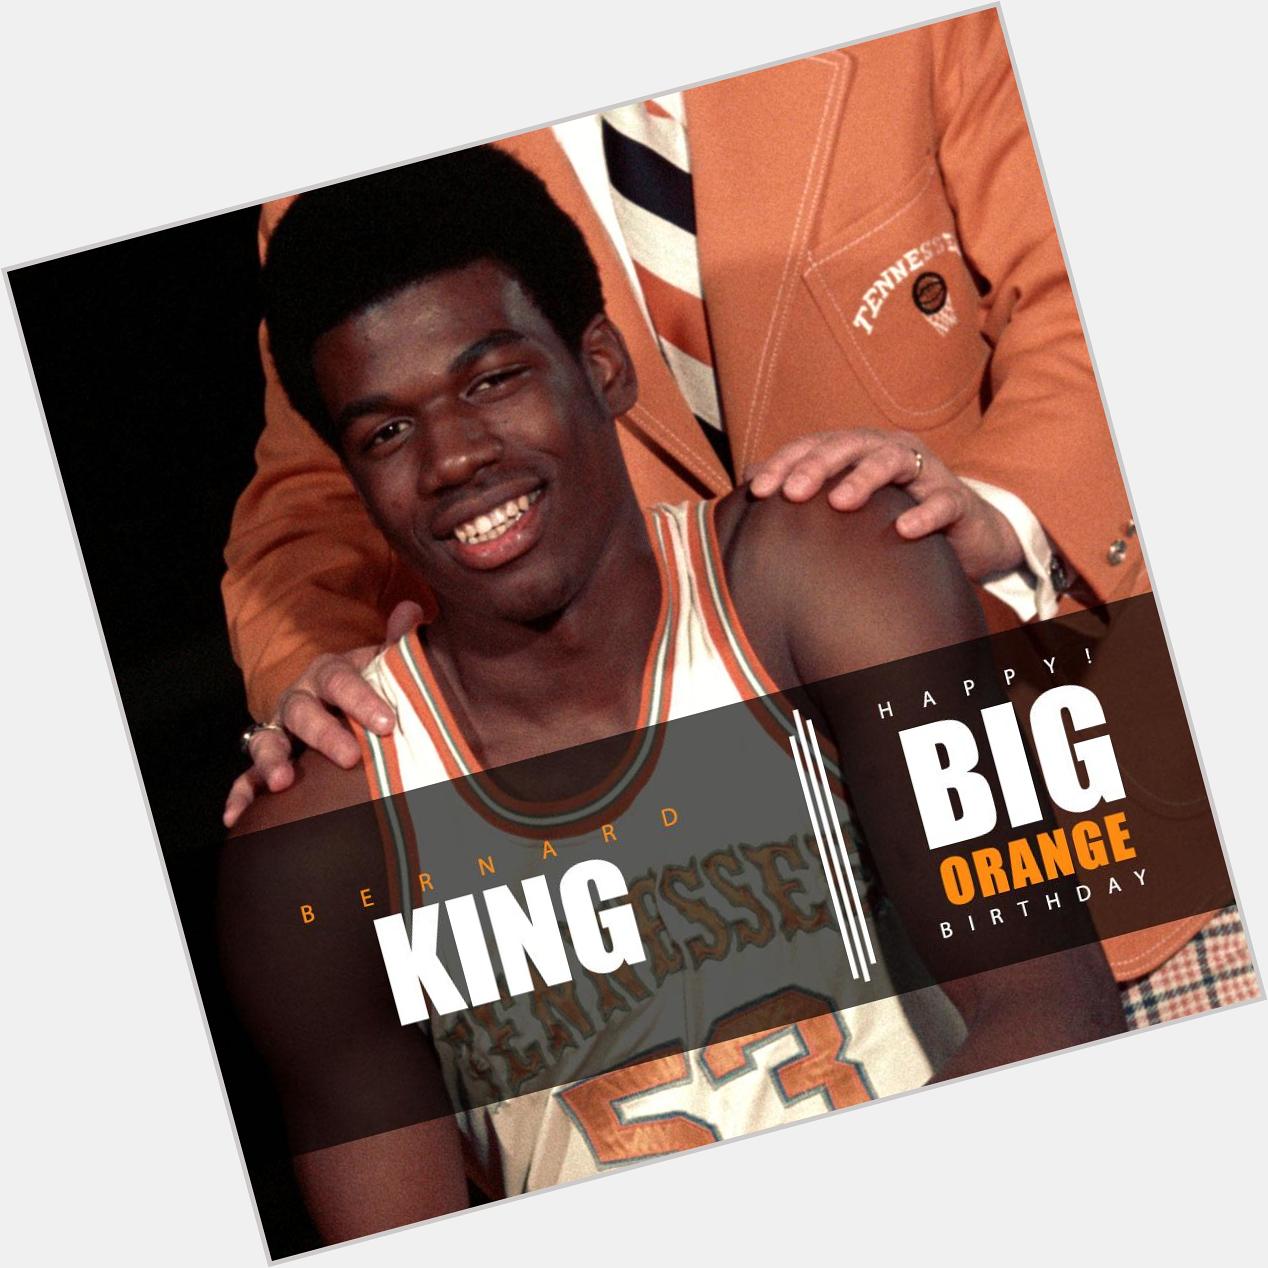 Happy birthday to and member Bernard King! Check out his Tennessee highlights:  